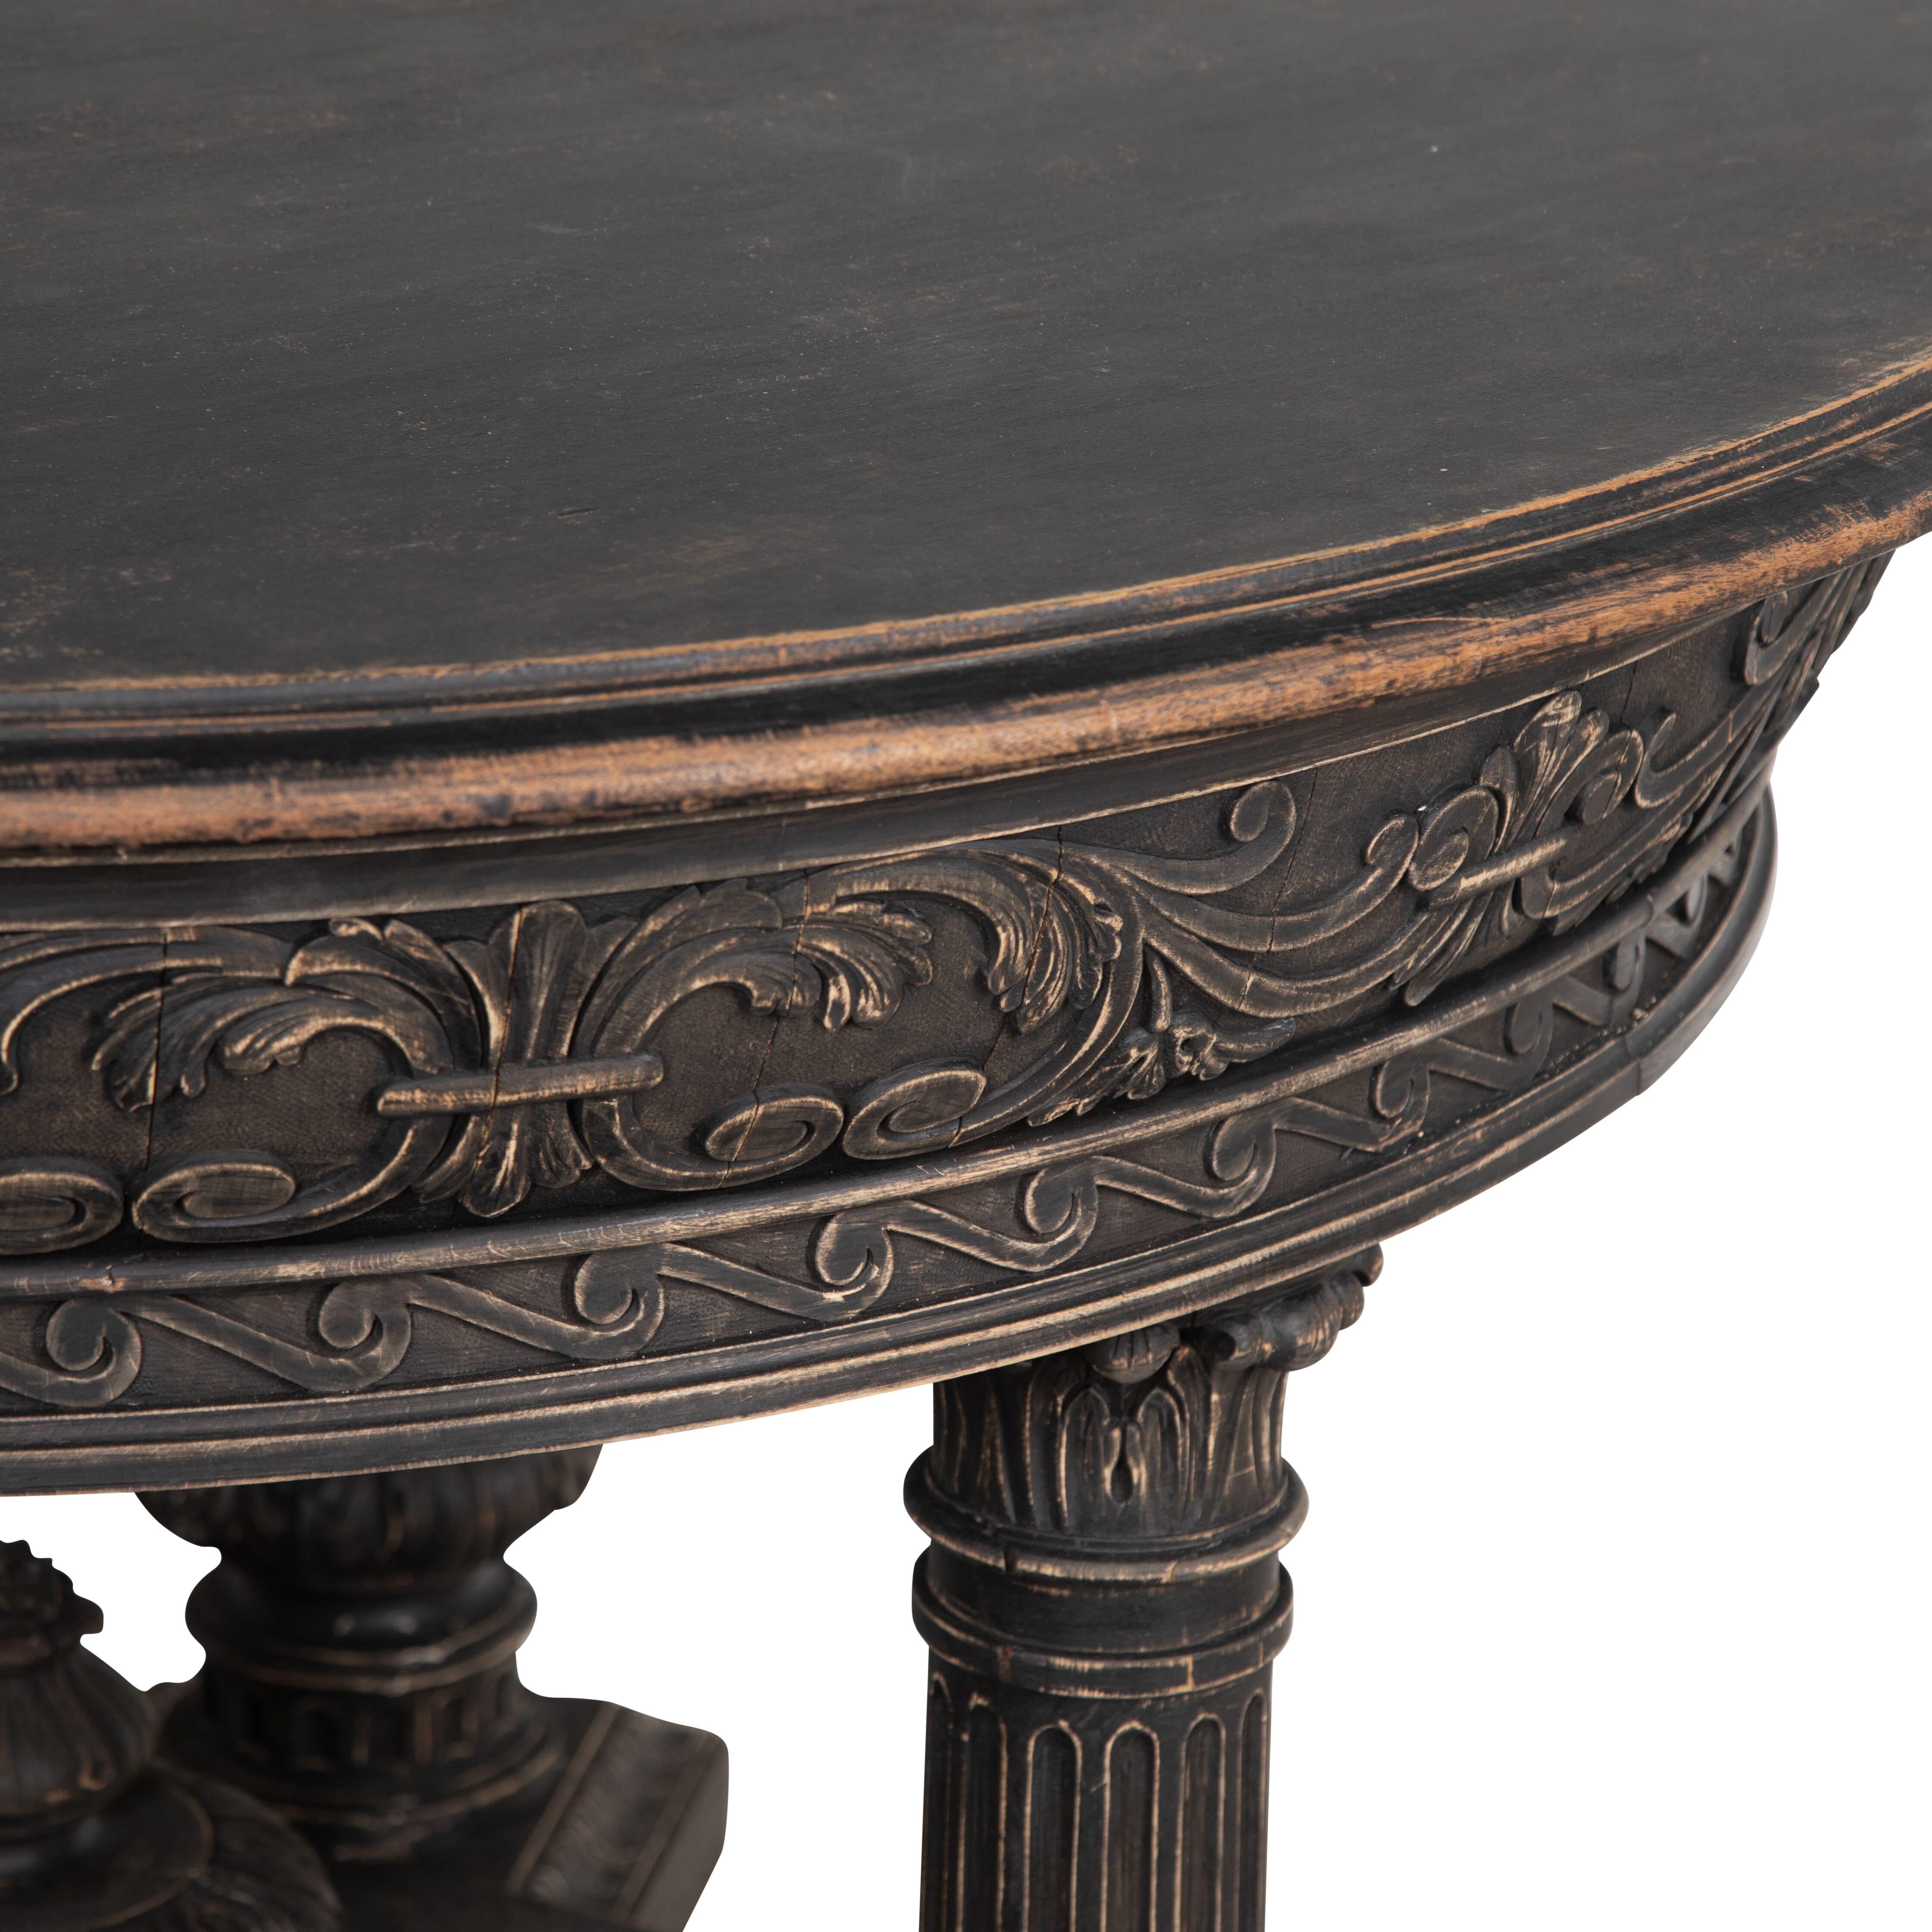 19th Century Swedish circular table.
With carved decorative detailing and in original black paint.
Circa 1860.